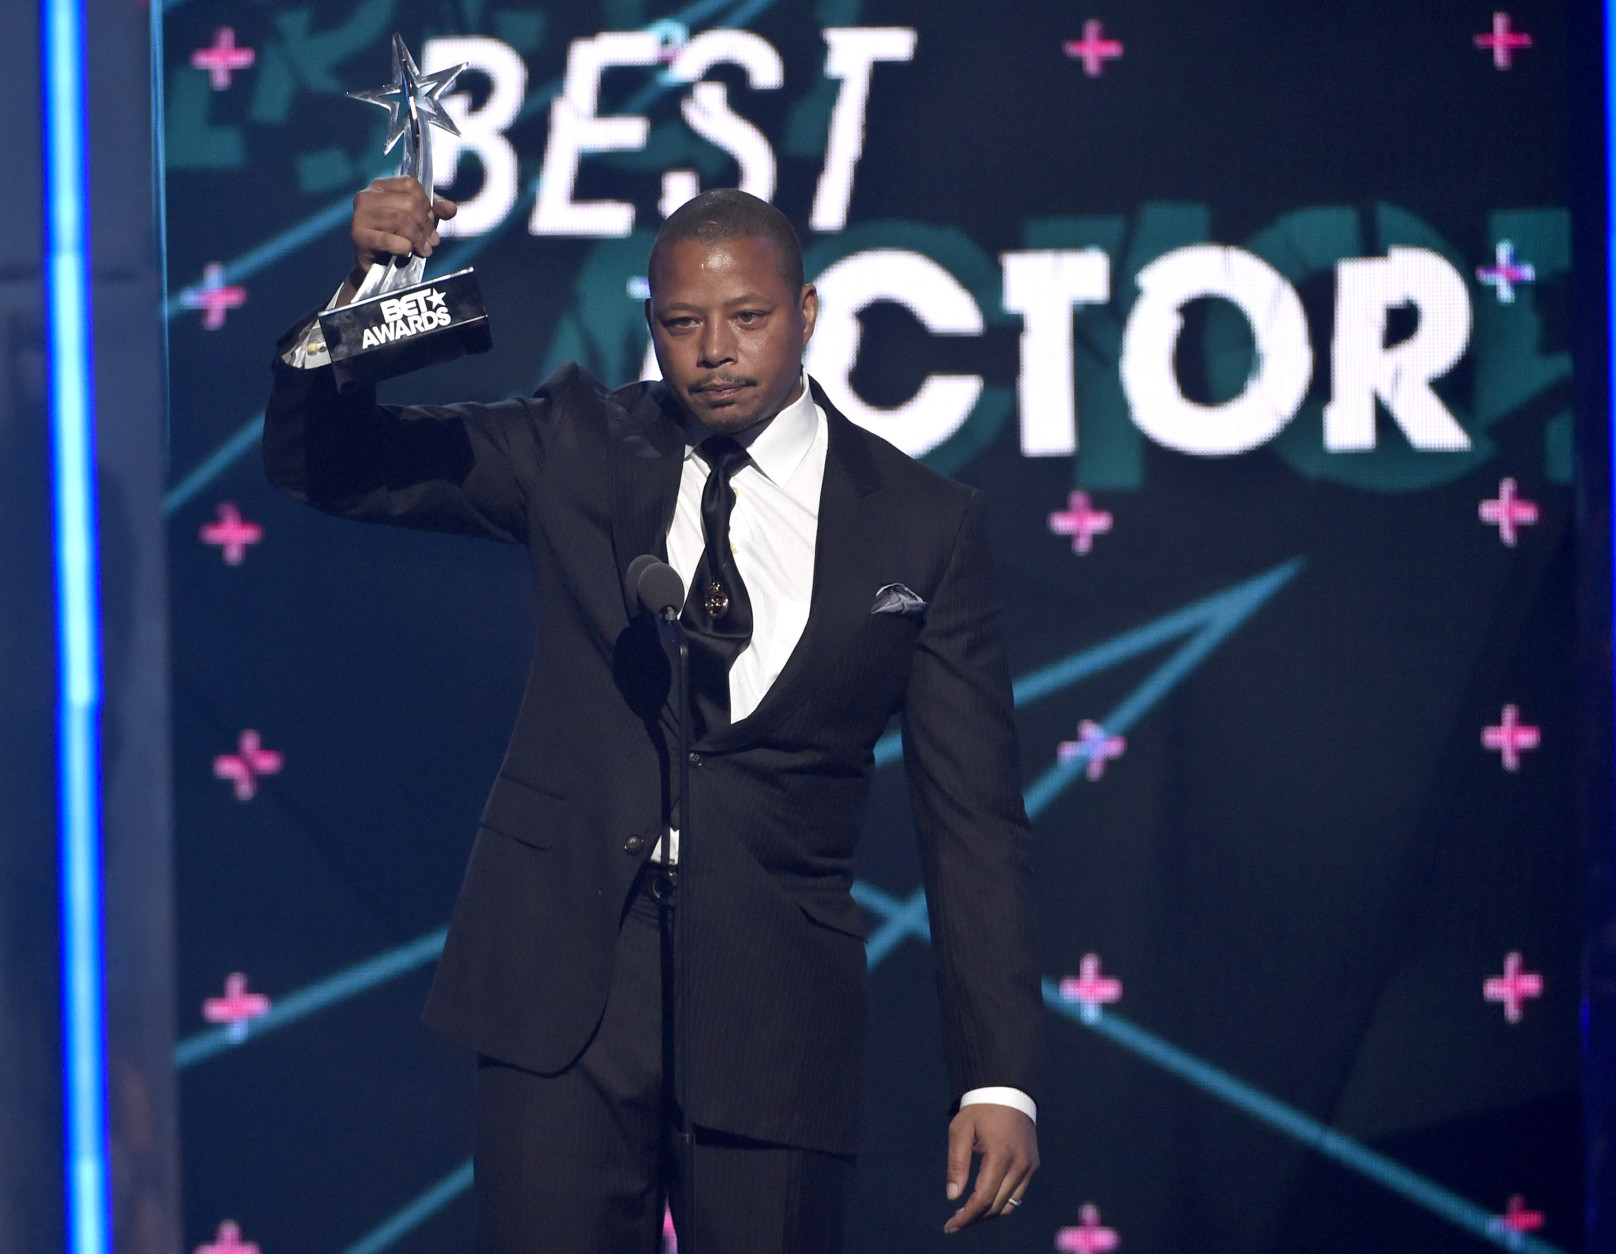 Terrence Howard accepts the award for best actor at the BET Awards at the Microsoft Theater on Sunday, June 28, 2015, in Los Angeles. (Photo by Chris Pizzello/Invision/AP)